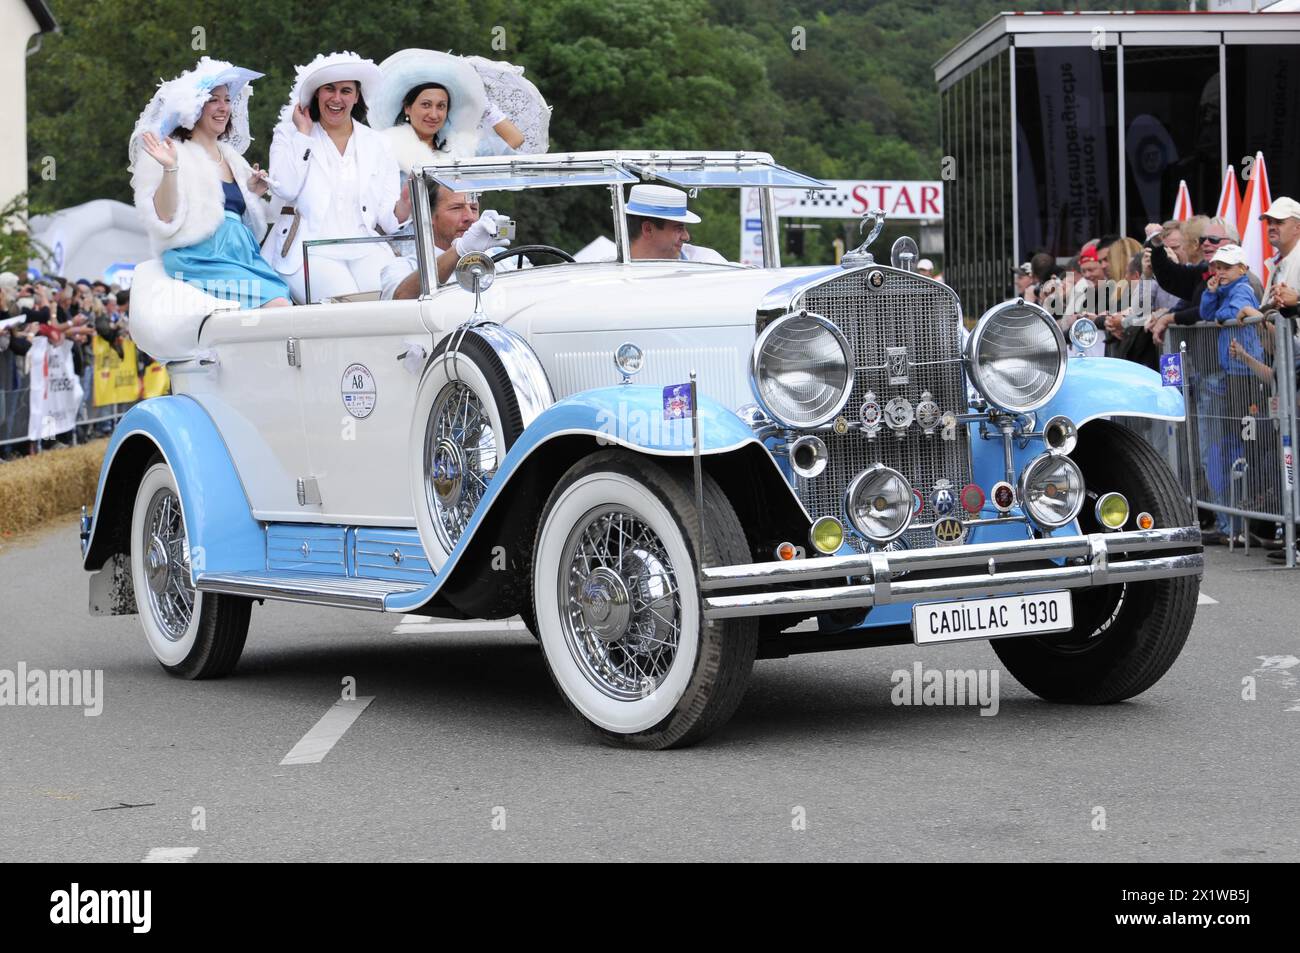 Cadillac Imperial Phaeton, built in 1930, A historic white Cadillac in a festive parade with passengers in costumes, SOLITUDE REVIVAL 2011 Stock Photo